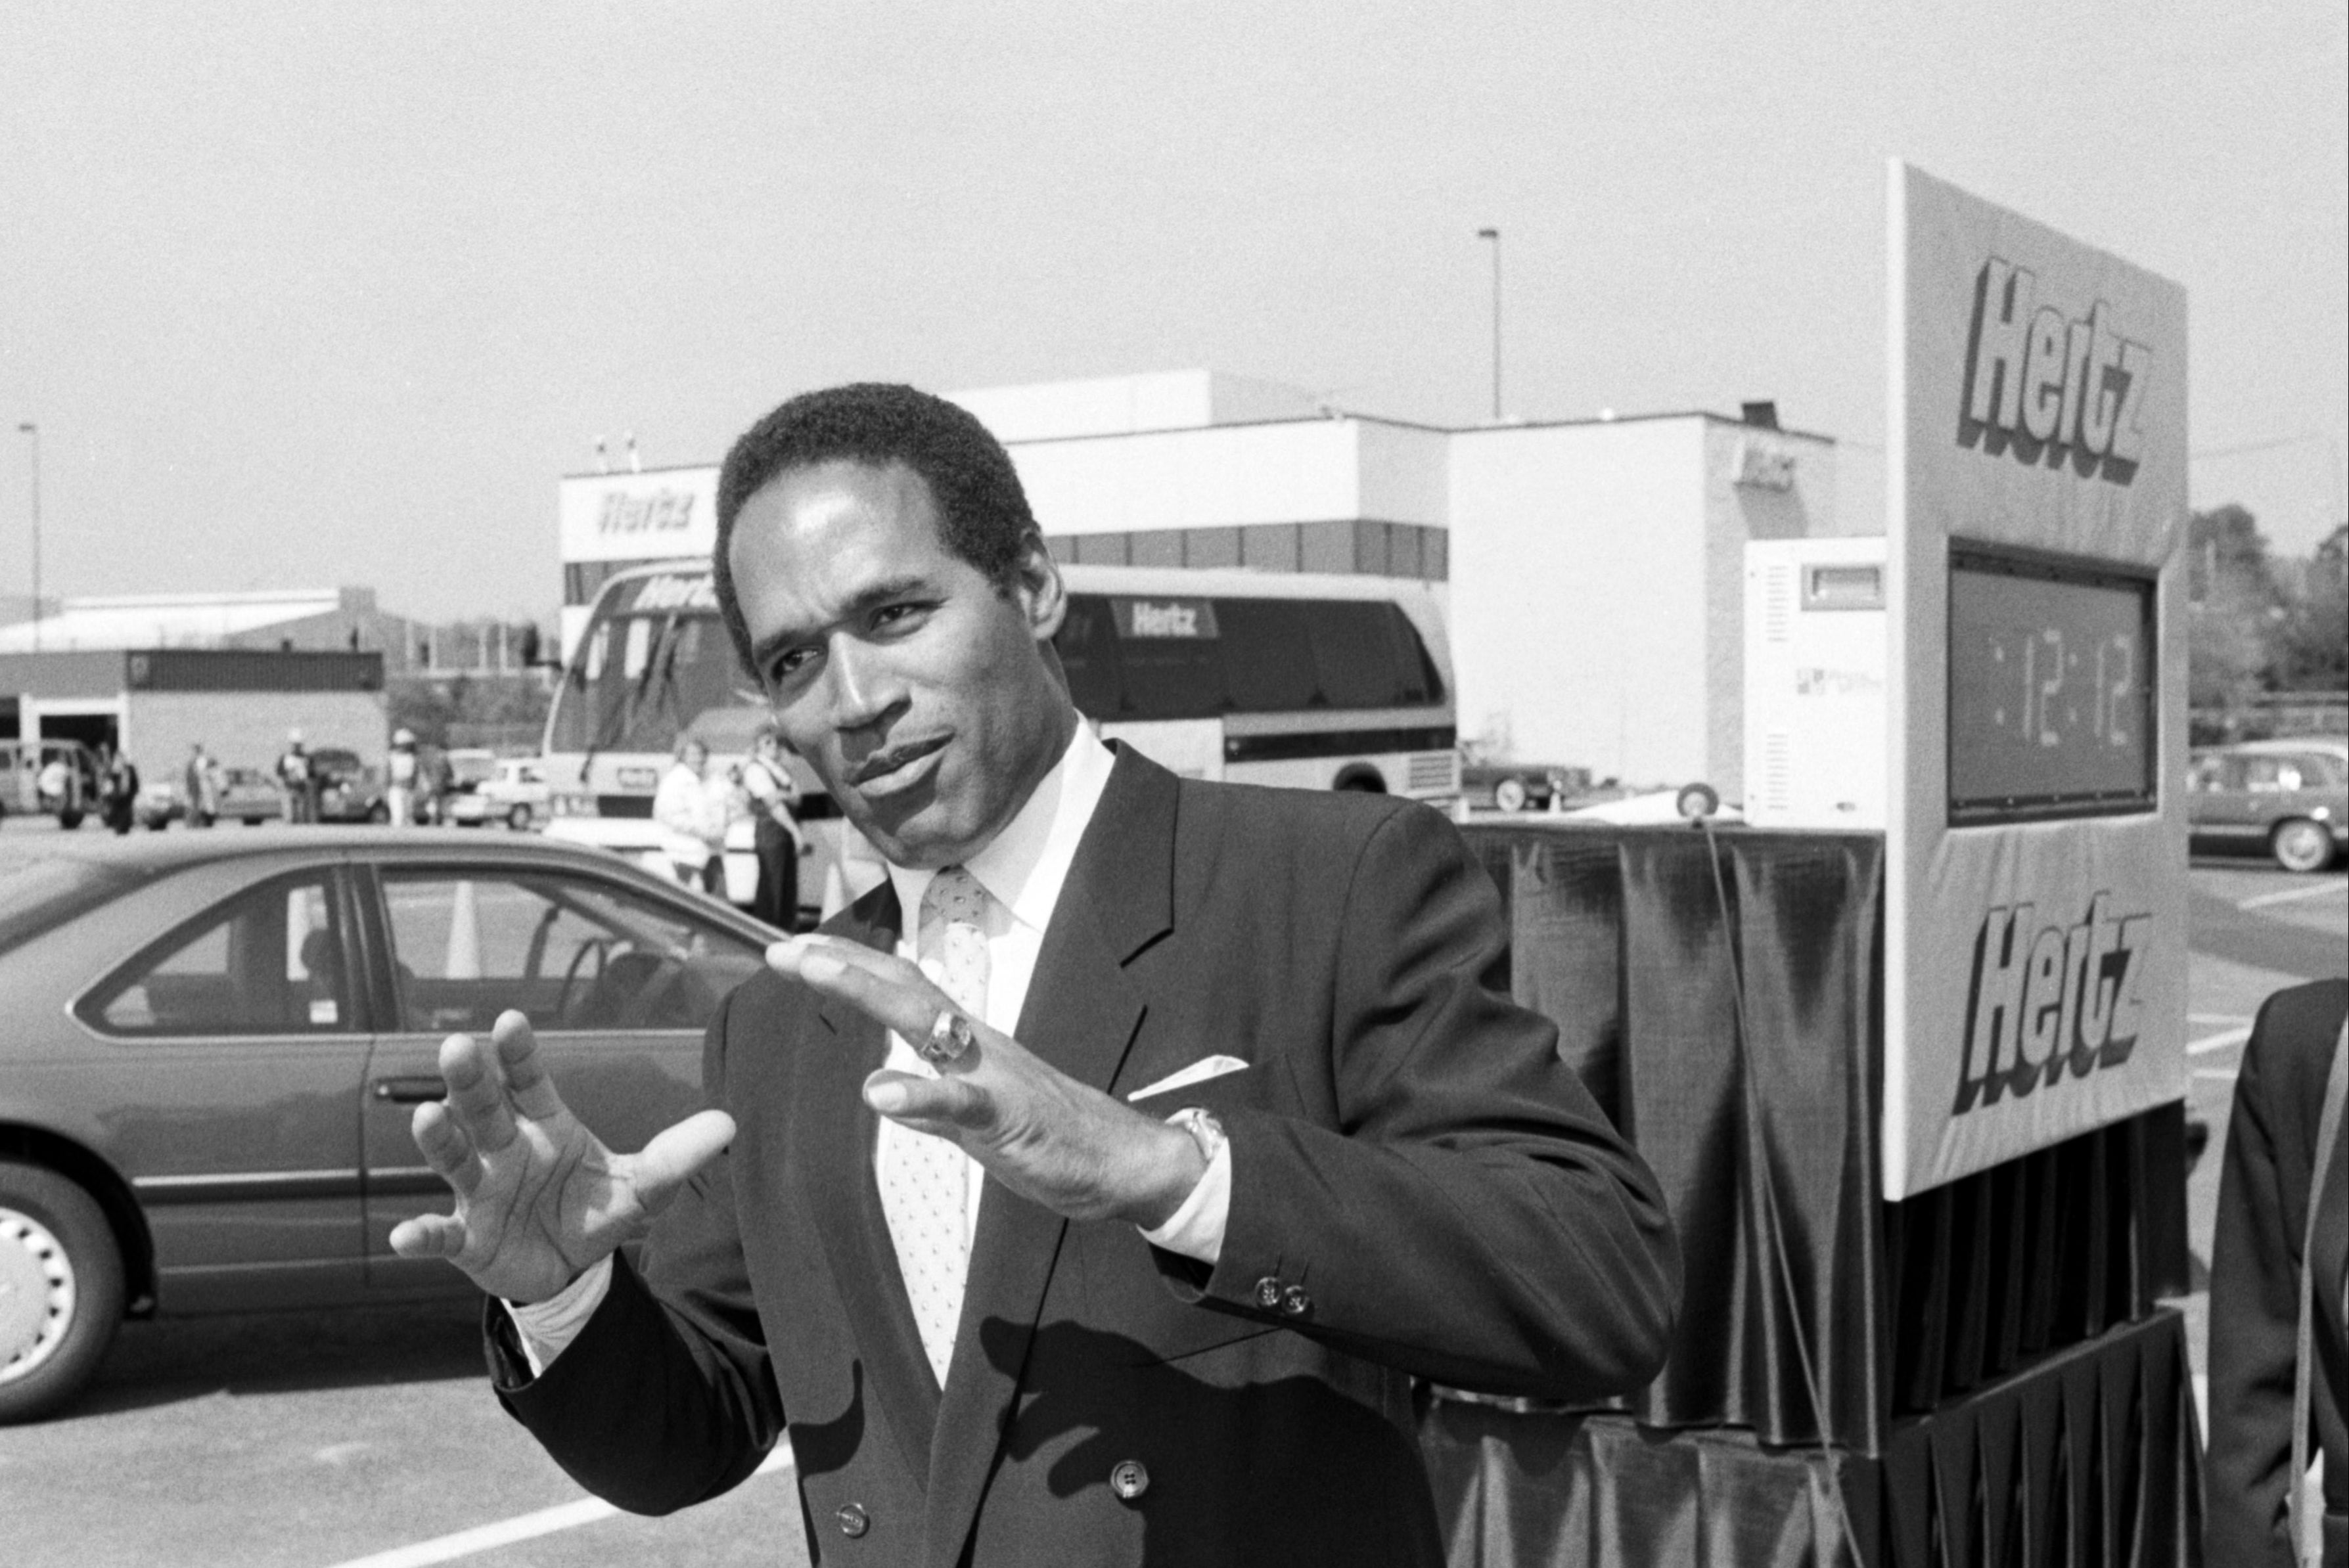 Simpson during a filming of a Hertz commercial at Atlanta Airport